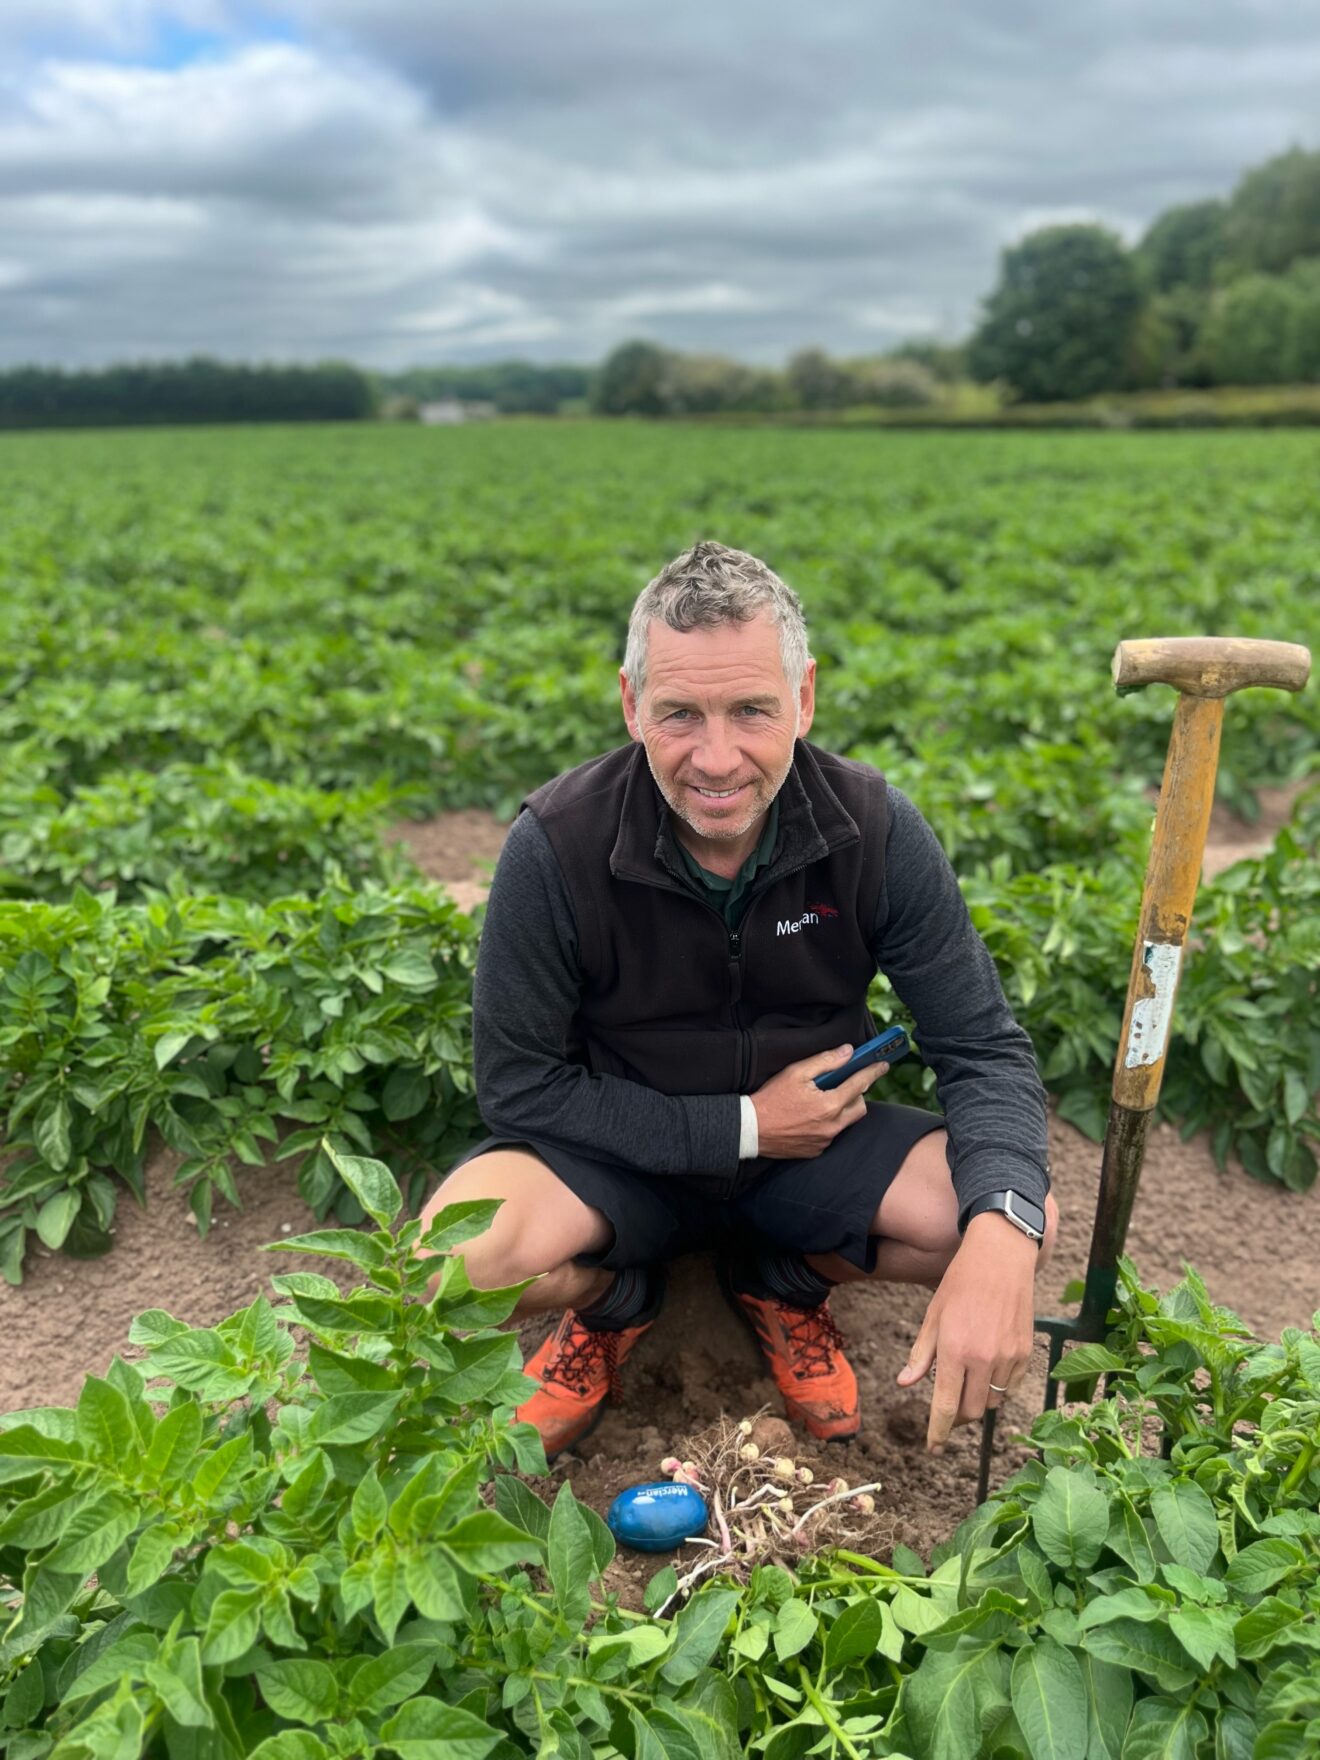 Best practice guidance issued for maleic hydrazide use on potatoes this season